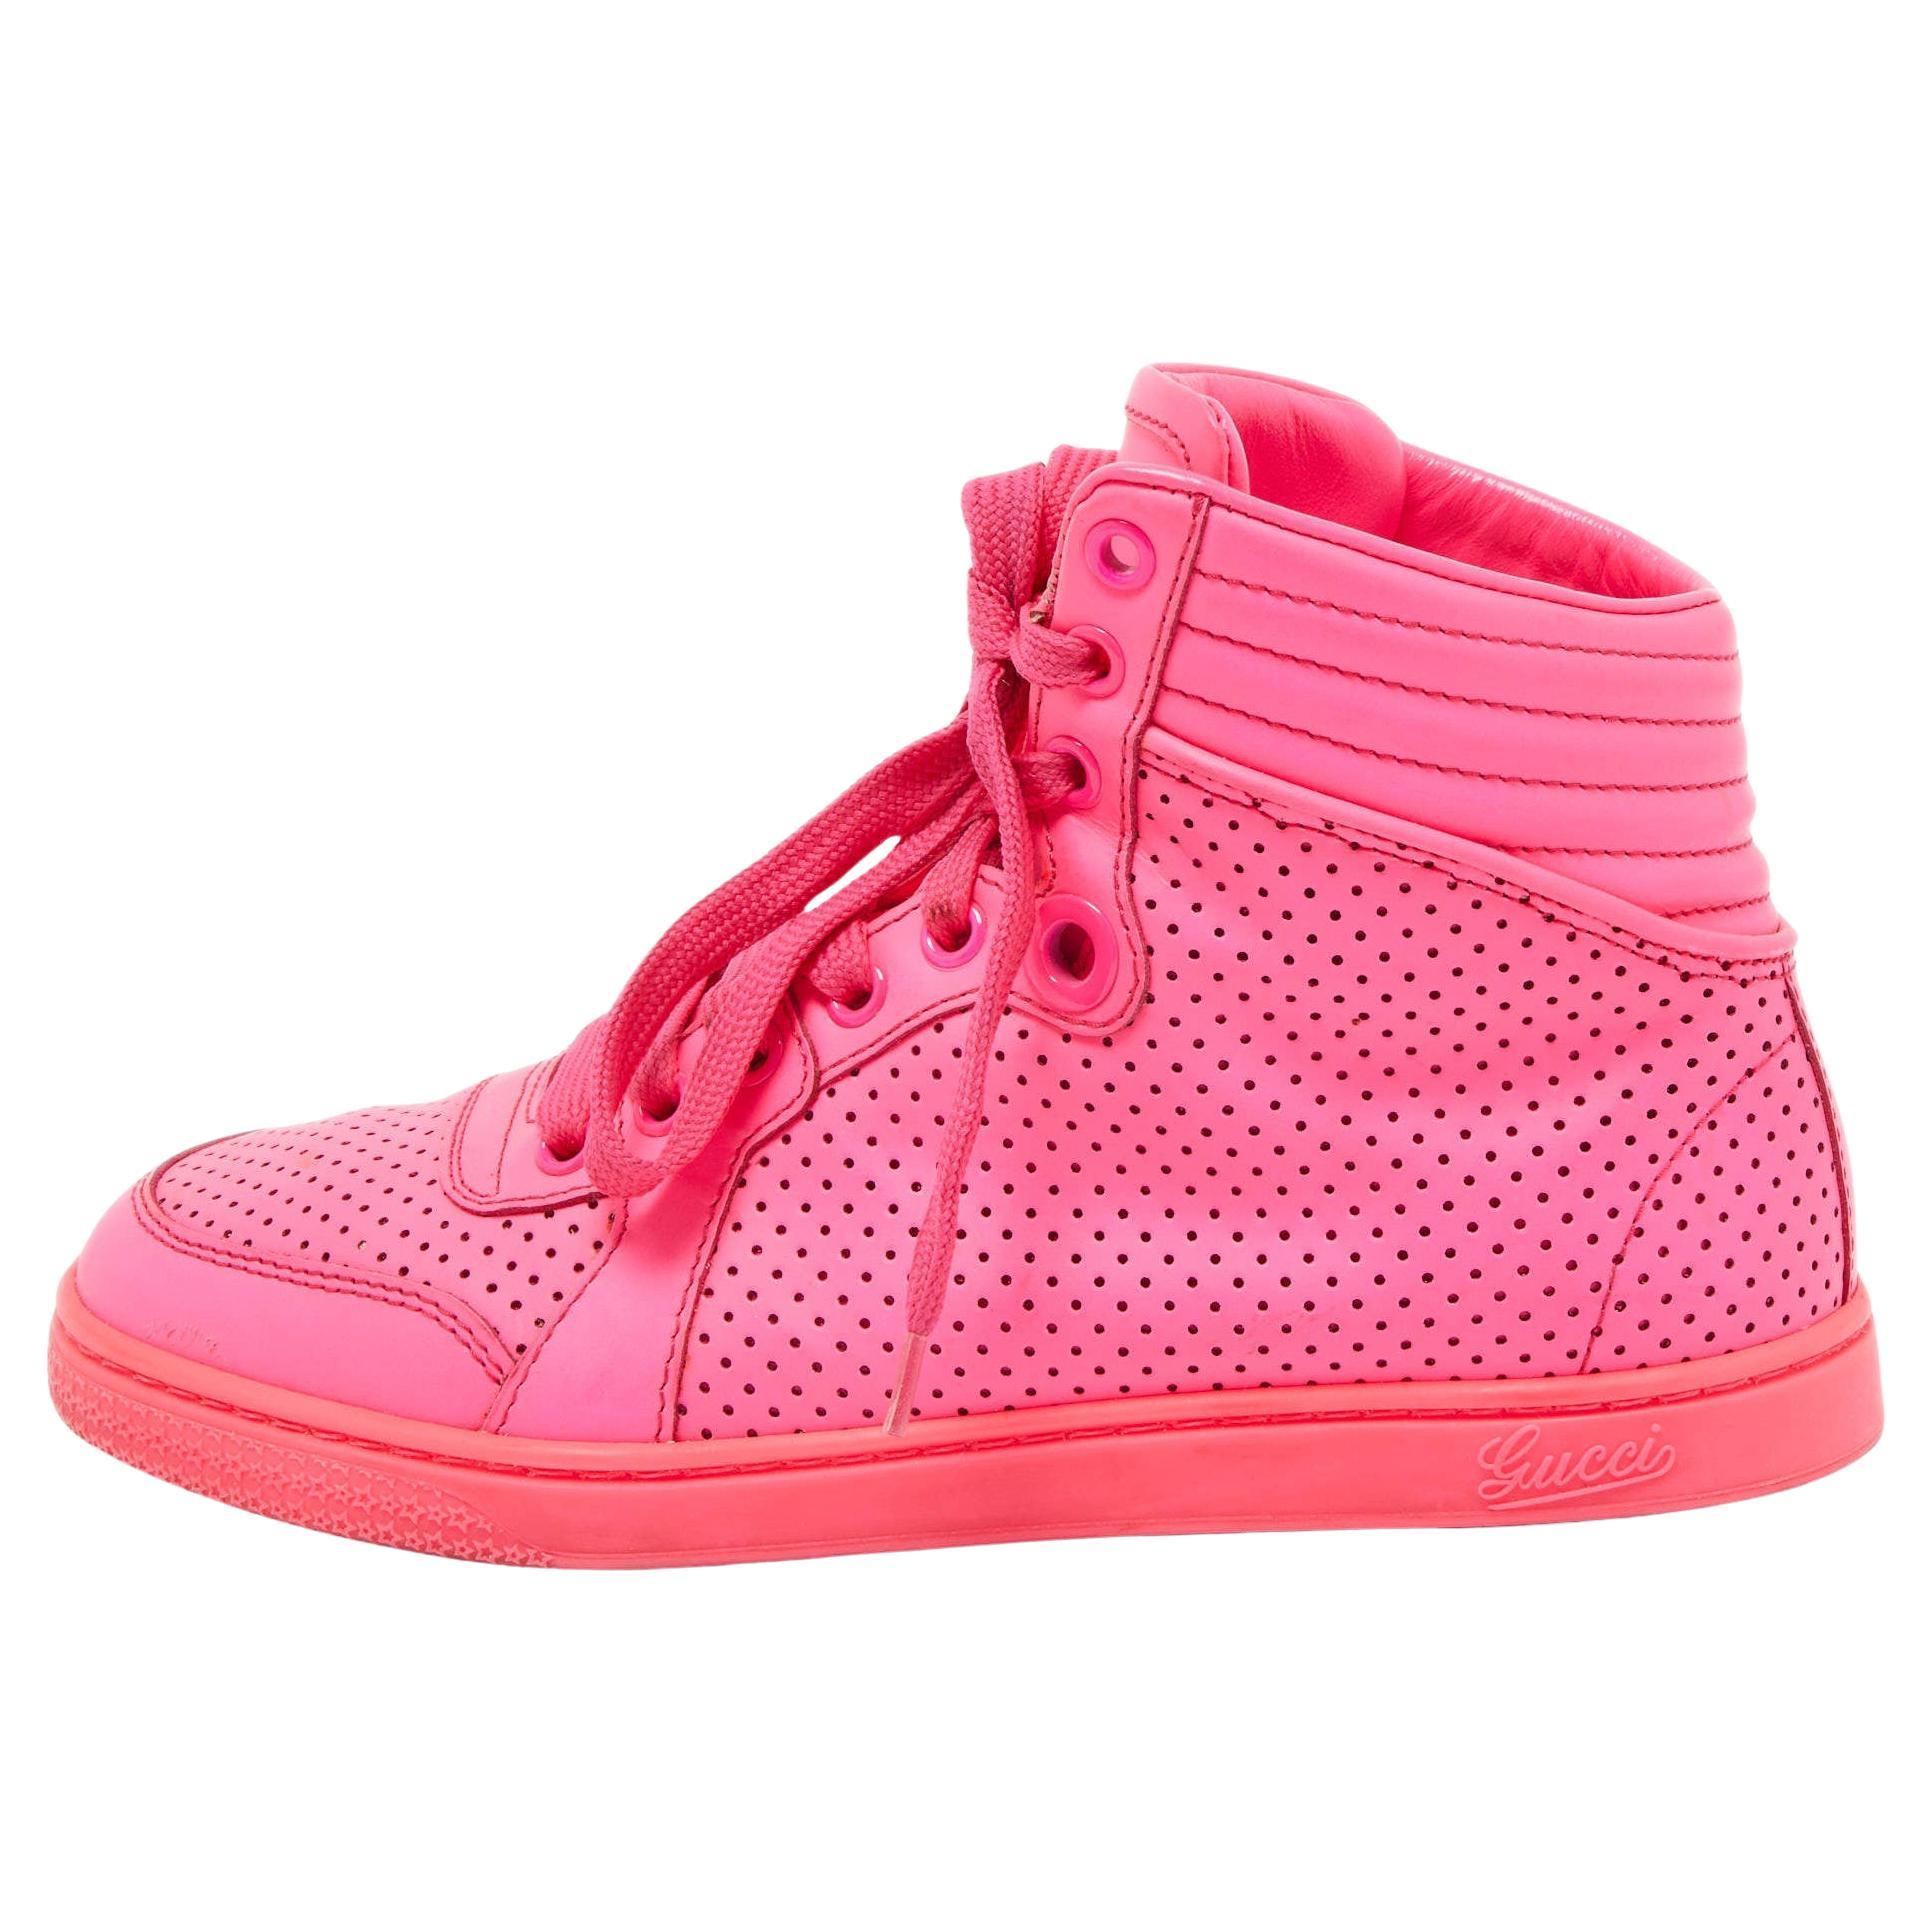 Gucci Neon Pink Perforated Leather Coda High Top Sneakers Size 35.5 For Sale